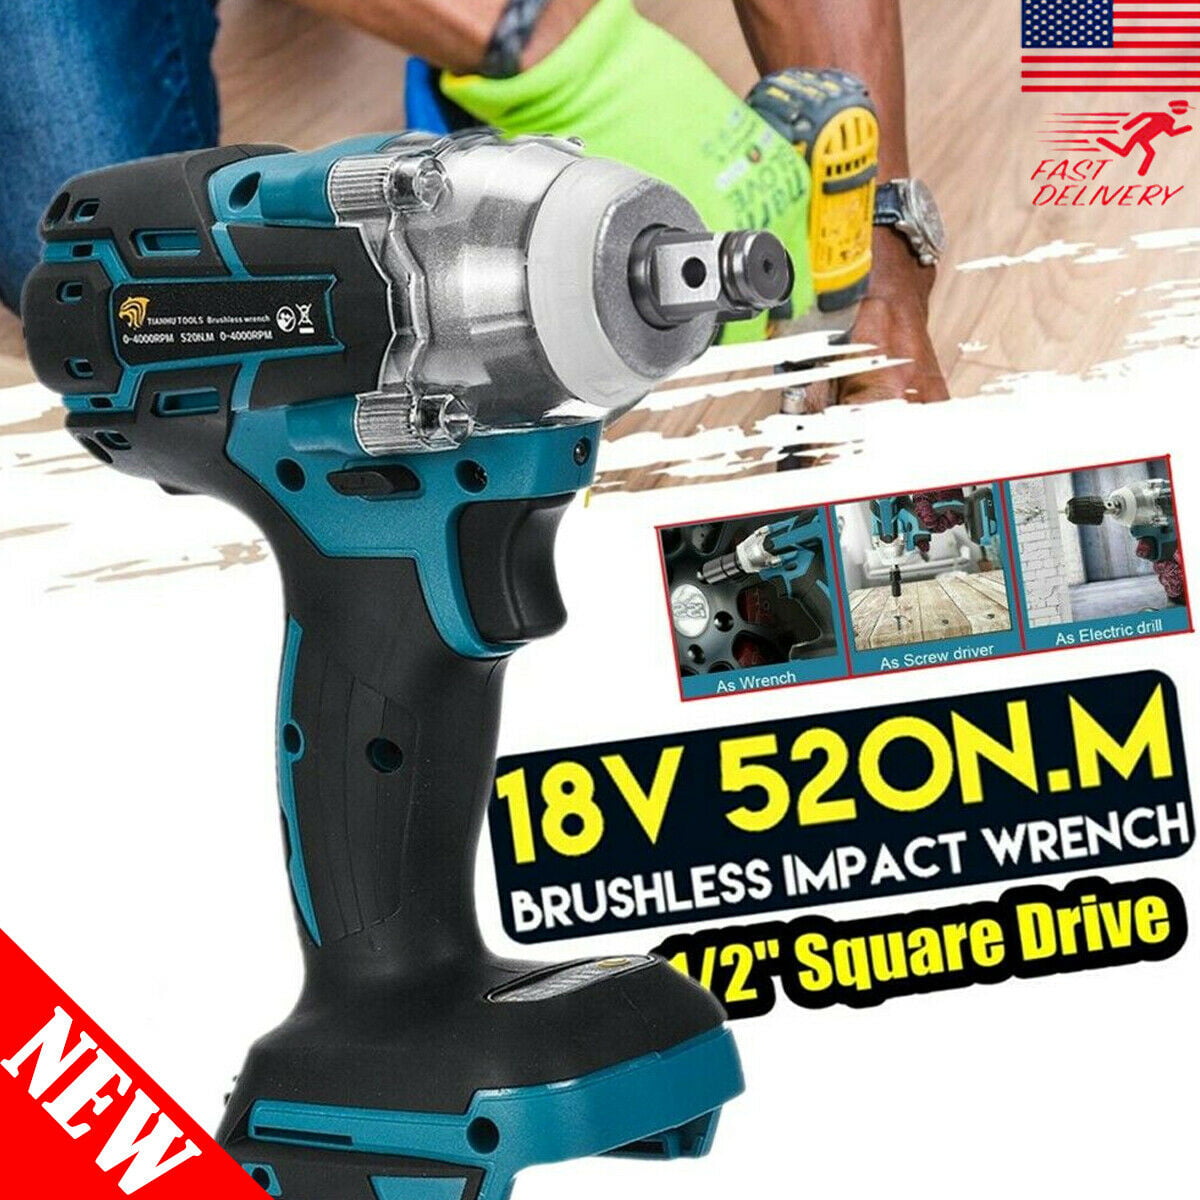 18V 1/2" 520Nm Impact Wrench Brushless Cordless Drill For Makita~Battery DTW285Z